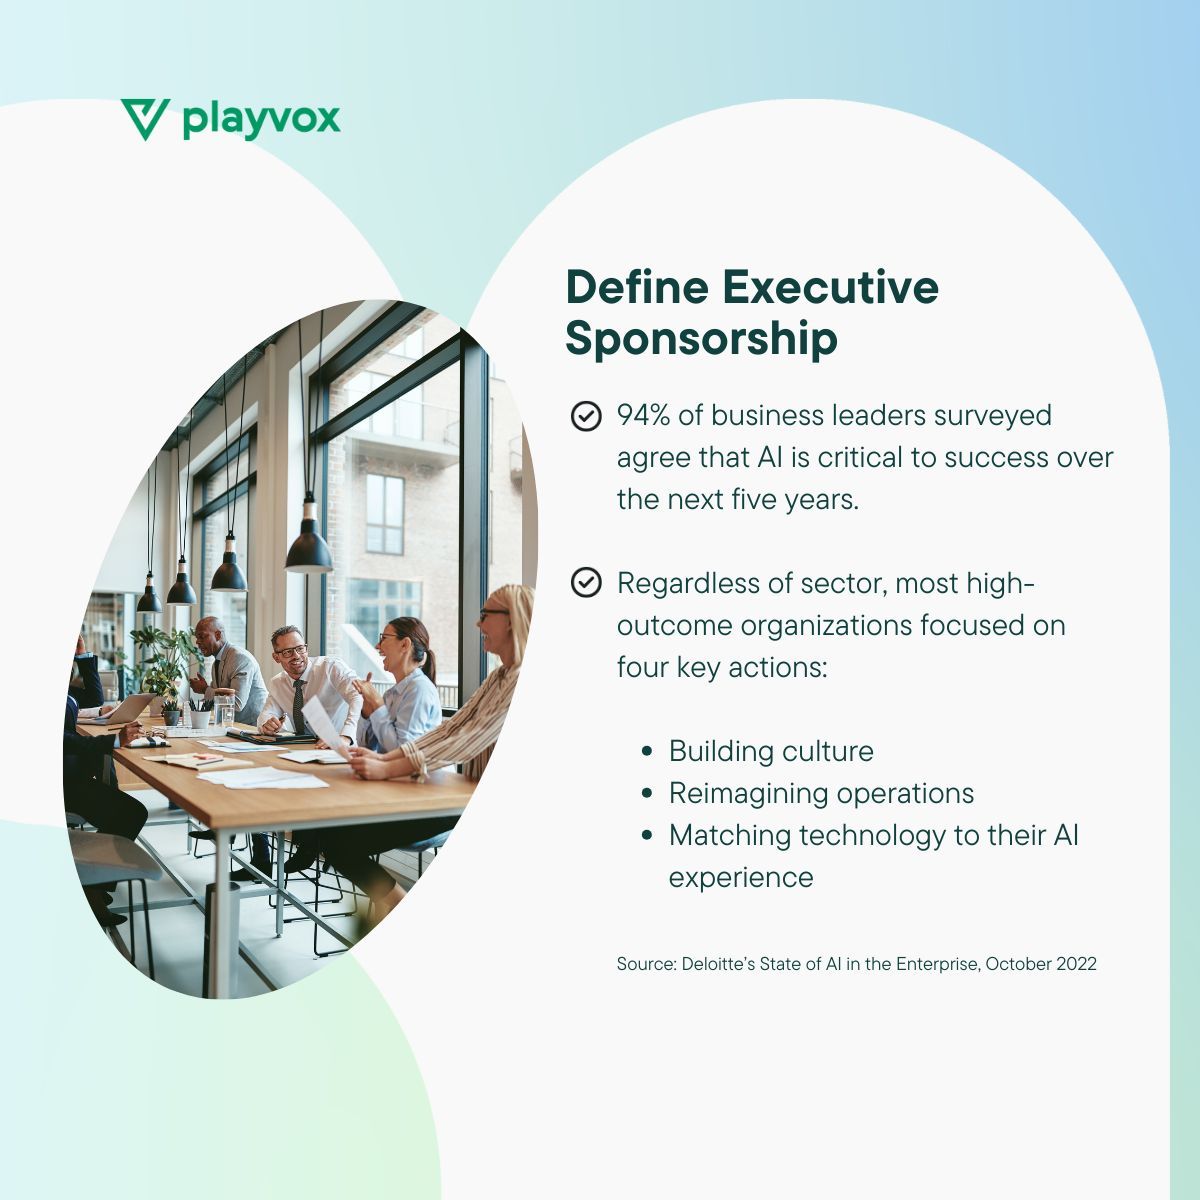 AI alone won’t magically fix any issues or problems you may have today. Find out more about the fundamental parts of building a strategy where AI drives customer support innovation. buff.ly/45qfW4k #WEM #AI #PlayvoxCoach